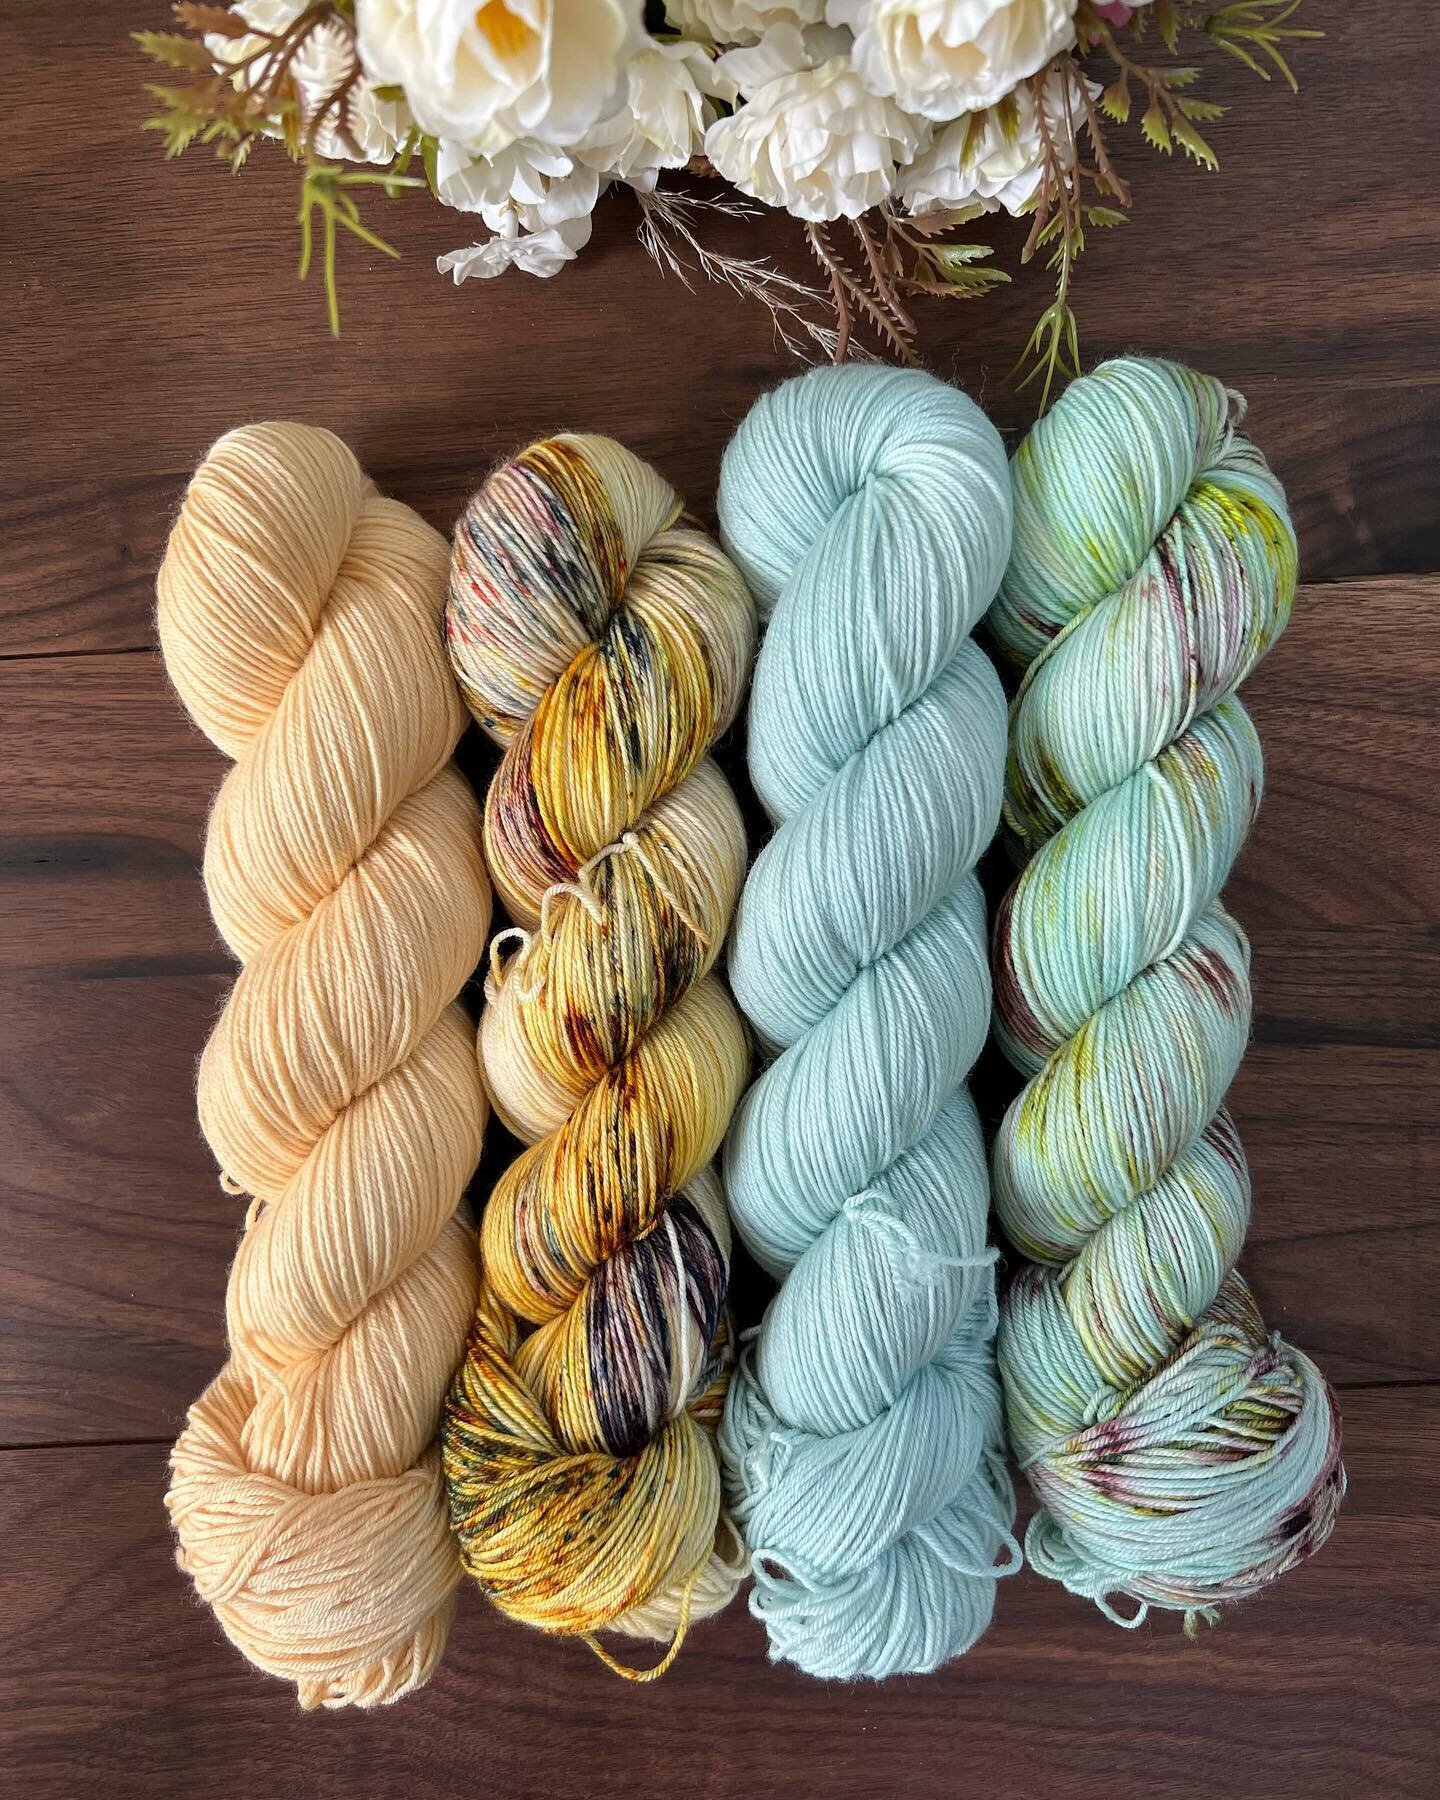 Happy Friday everyone!

Today is the 1st Friday of May &amp; that means Dyed to Order opens today (Friday, May 5th) at 6pm EDT until Friday, May 12th 😊

Since this will be the last Dyed to Order opening until September I have decided to keep the pre